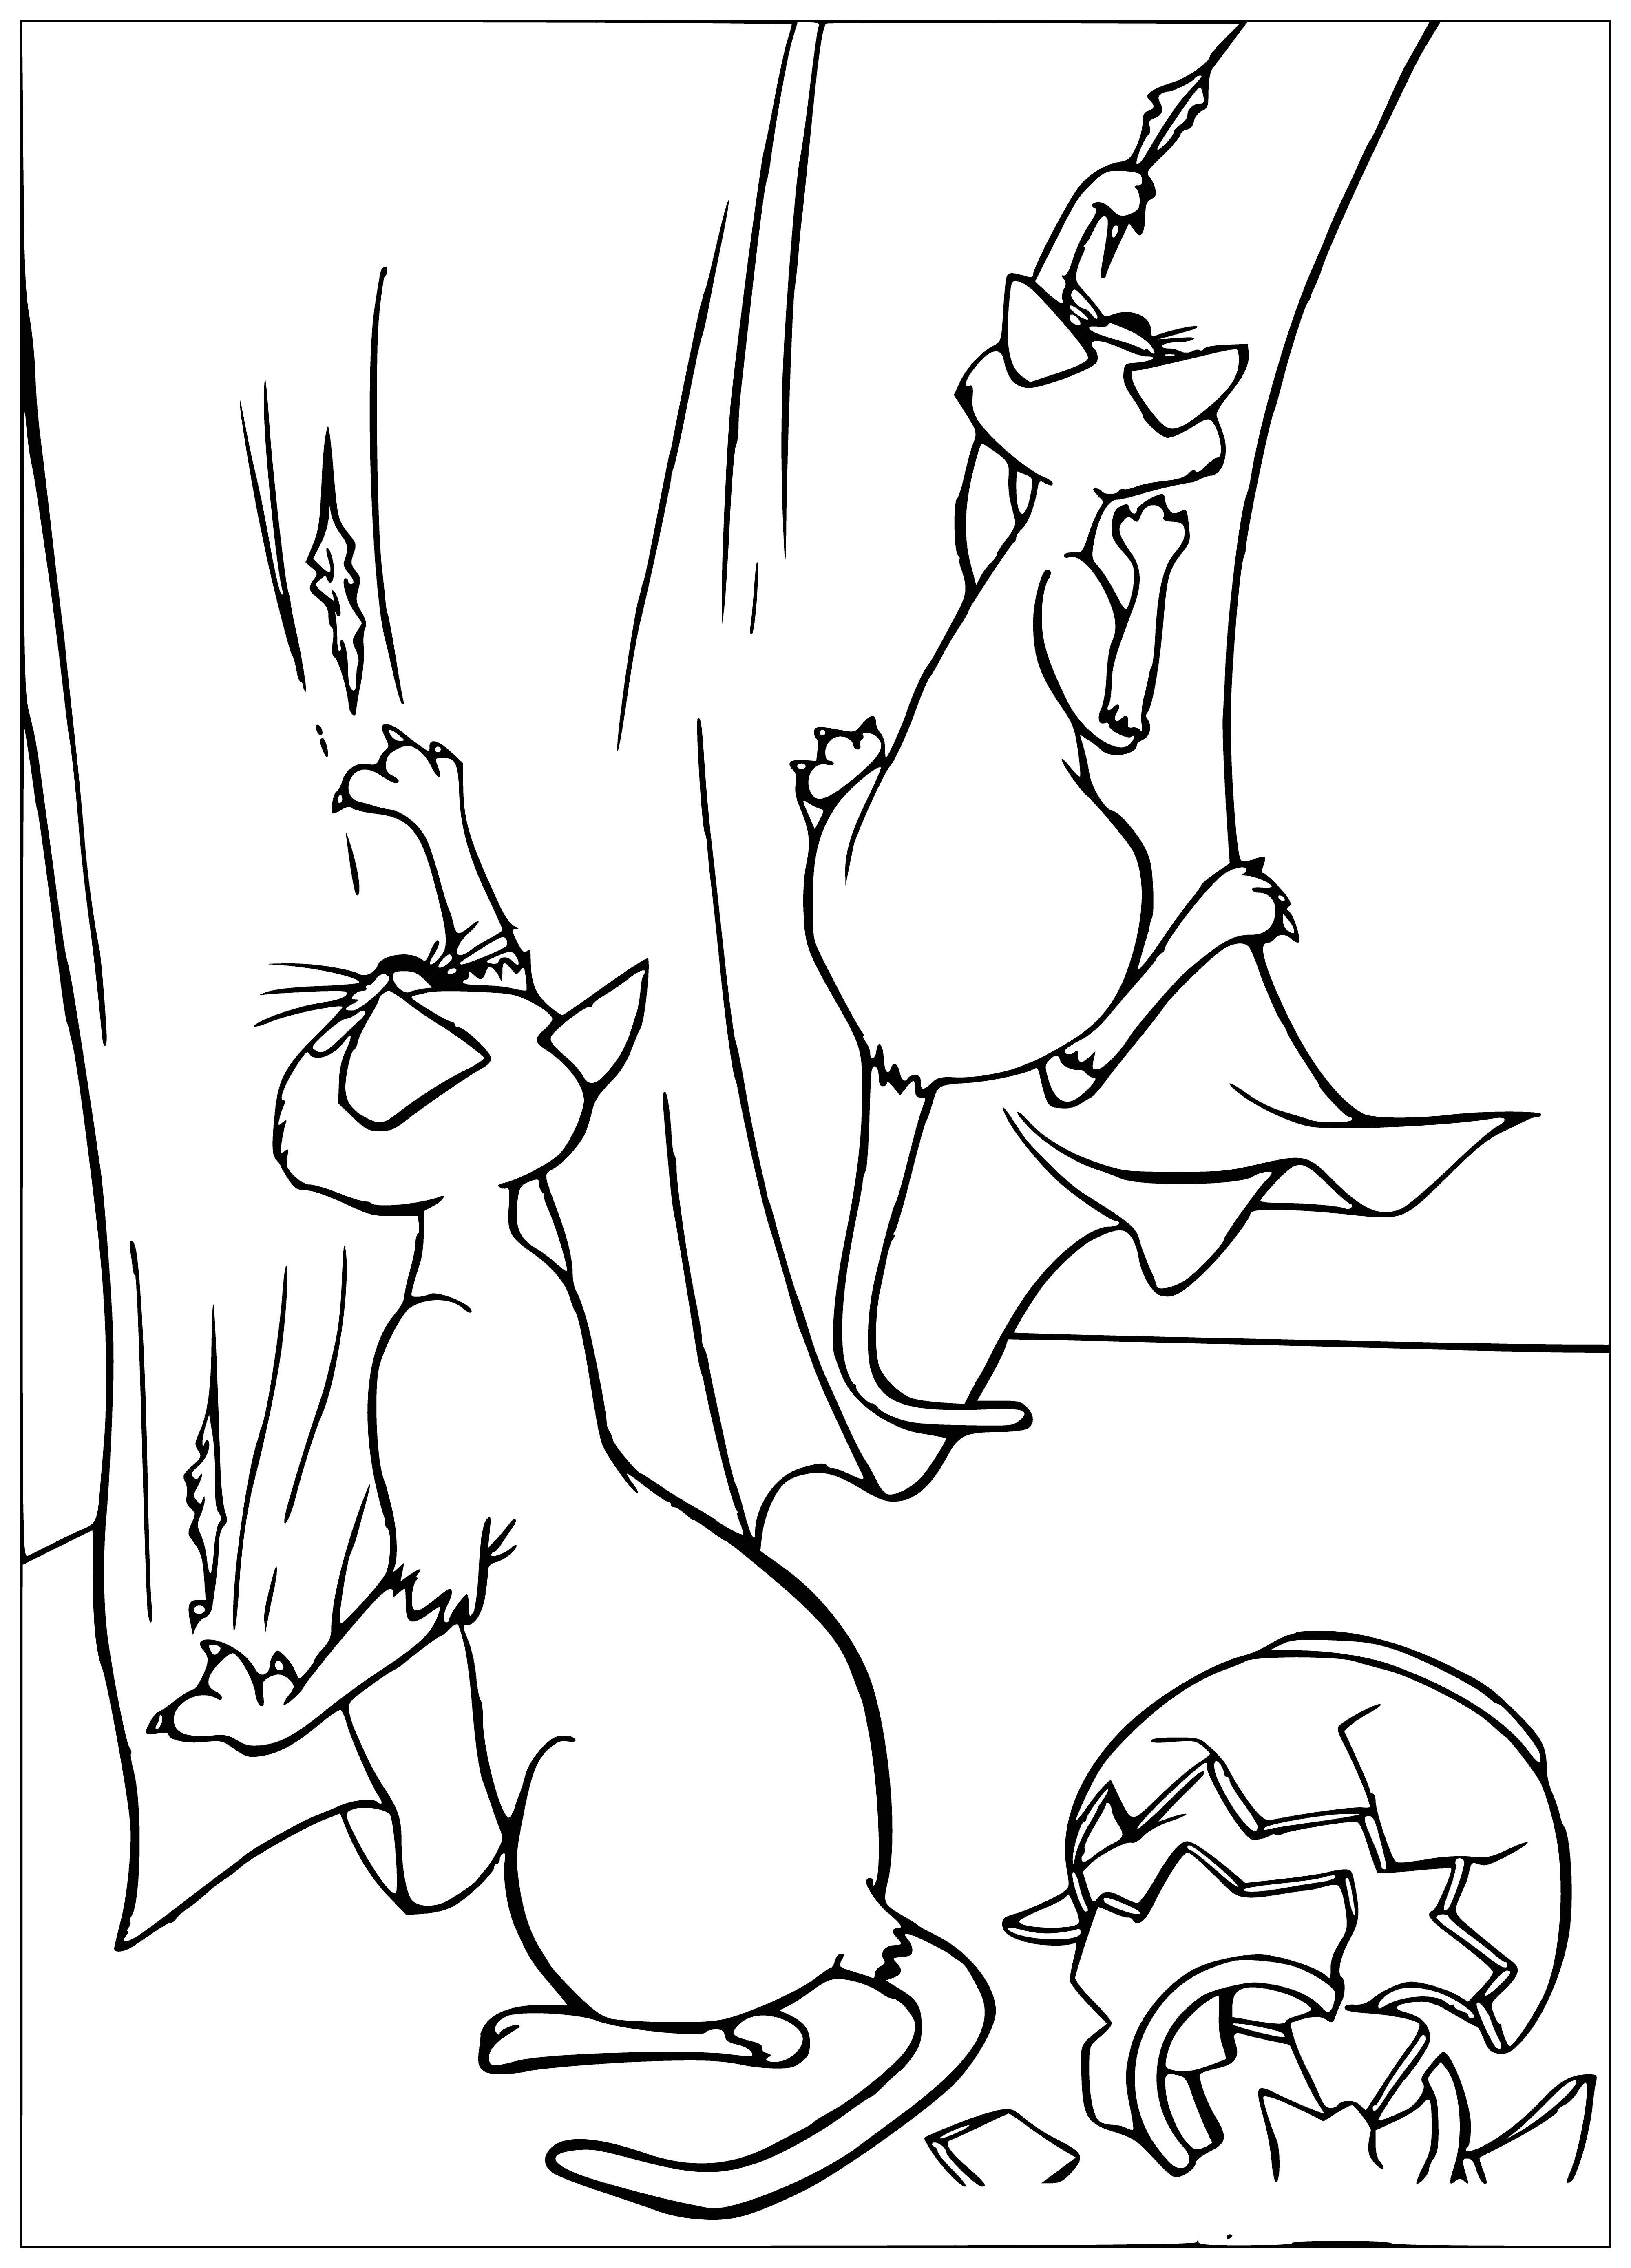 coloring page: Two cats, The Lady & The Tramp, on a roof looking at each other. She has a green collar, he has a red one. #CatsOnARoof